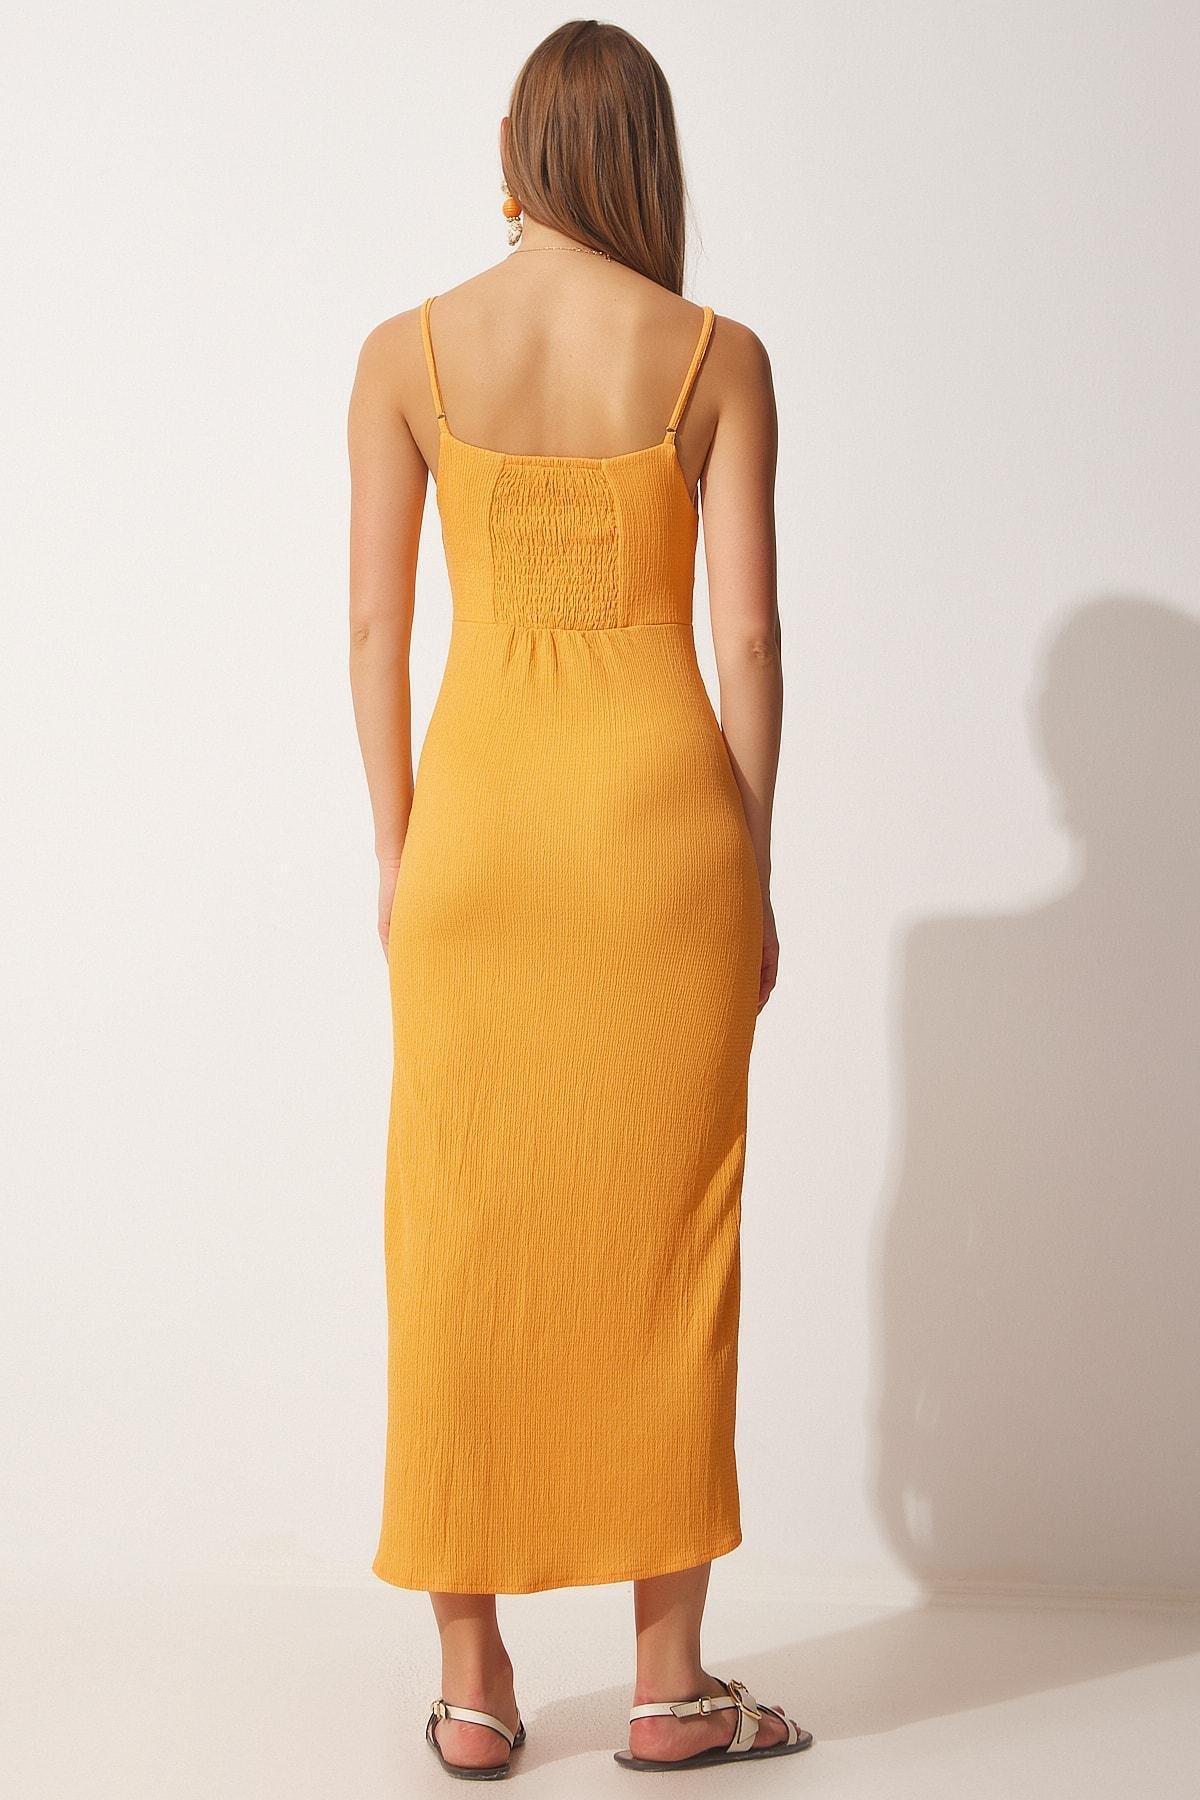 Happiness Istanbul - Orange Strap Slit Summer Knitted Dress